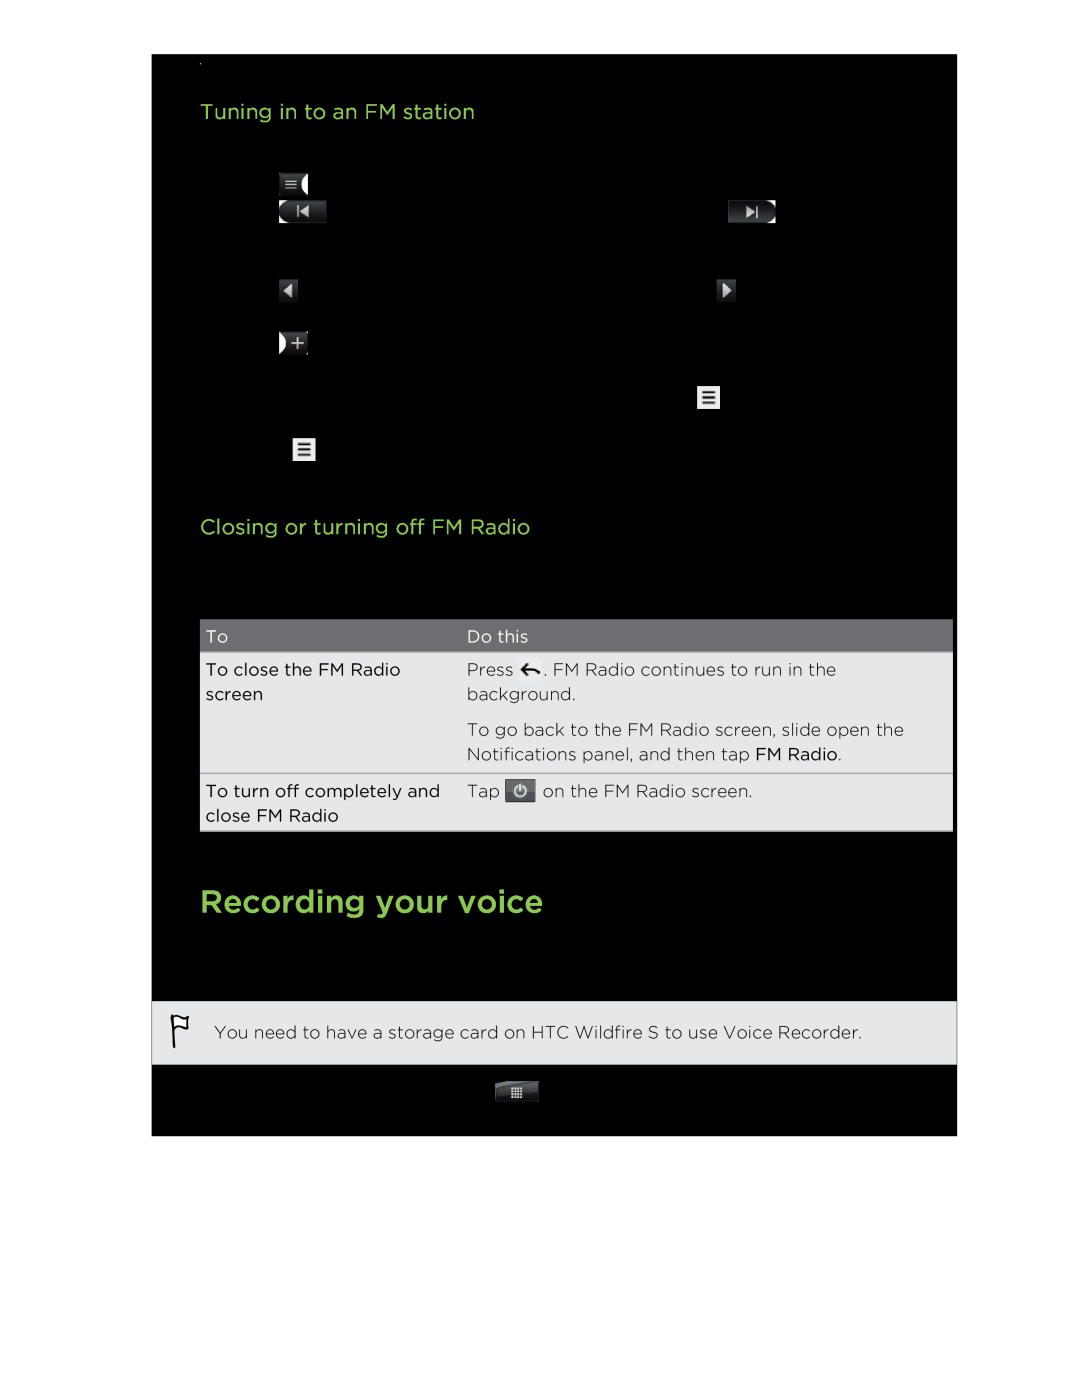 HTC S manual Recording your voice, Tuning in to an FM station, Closing or turning off FM Radio, Do this 